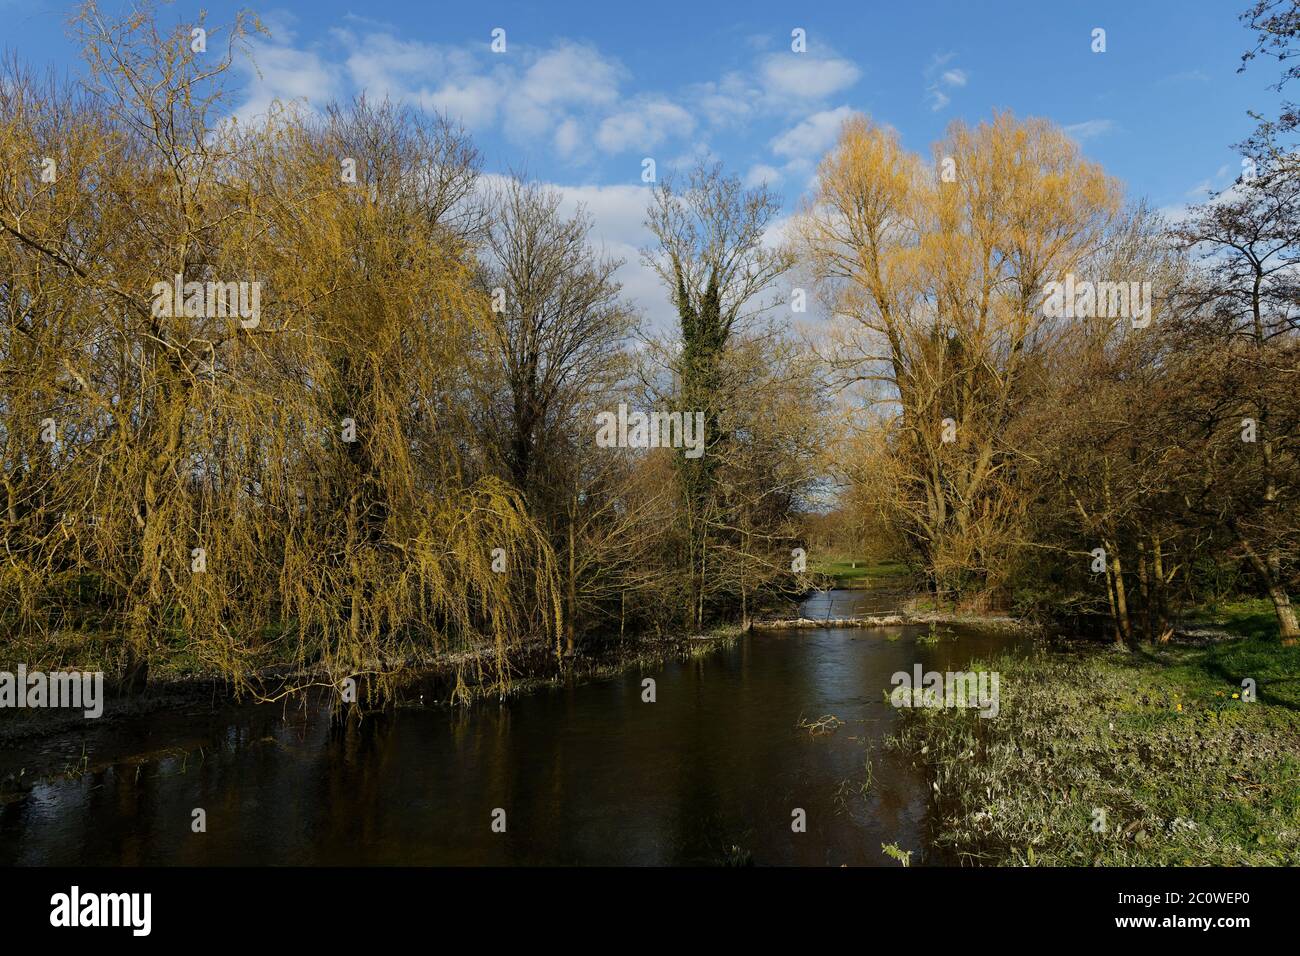 River Bourne and willow trees with yellow stems in the spring Newton Tony Wiltshire Stock Photo